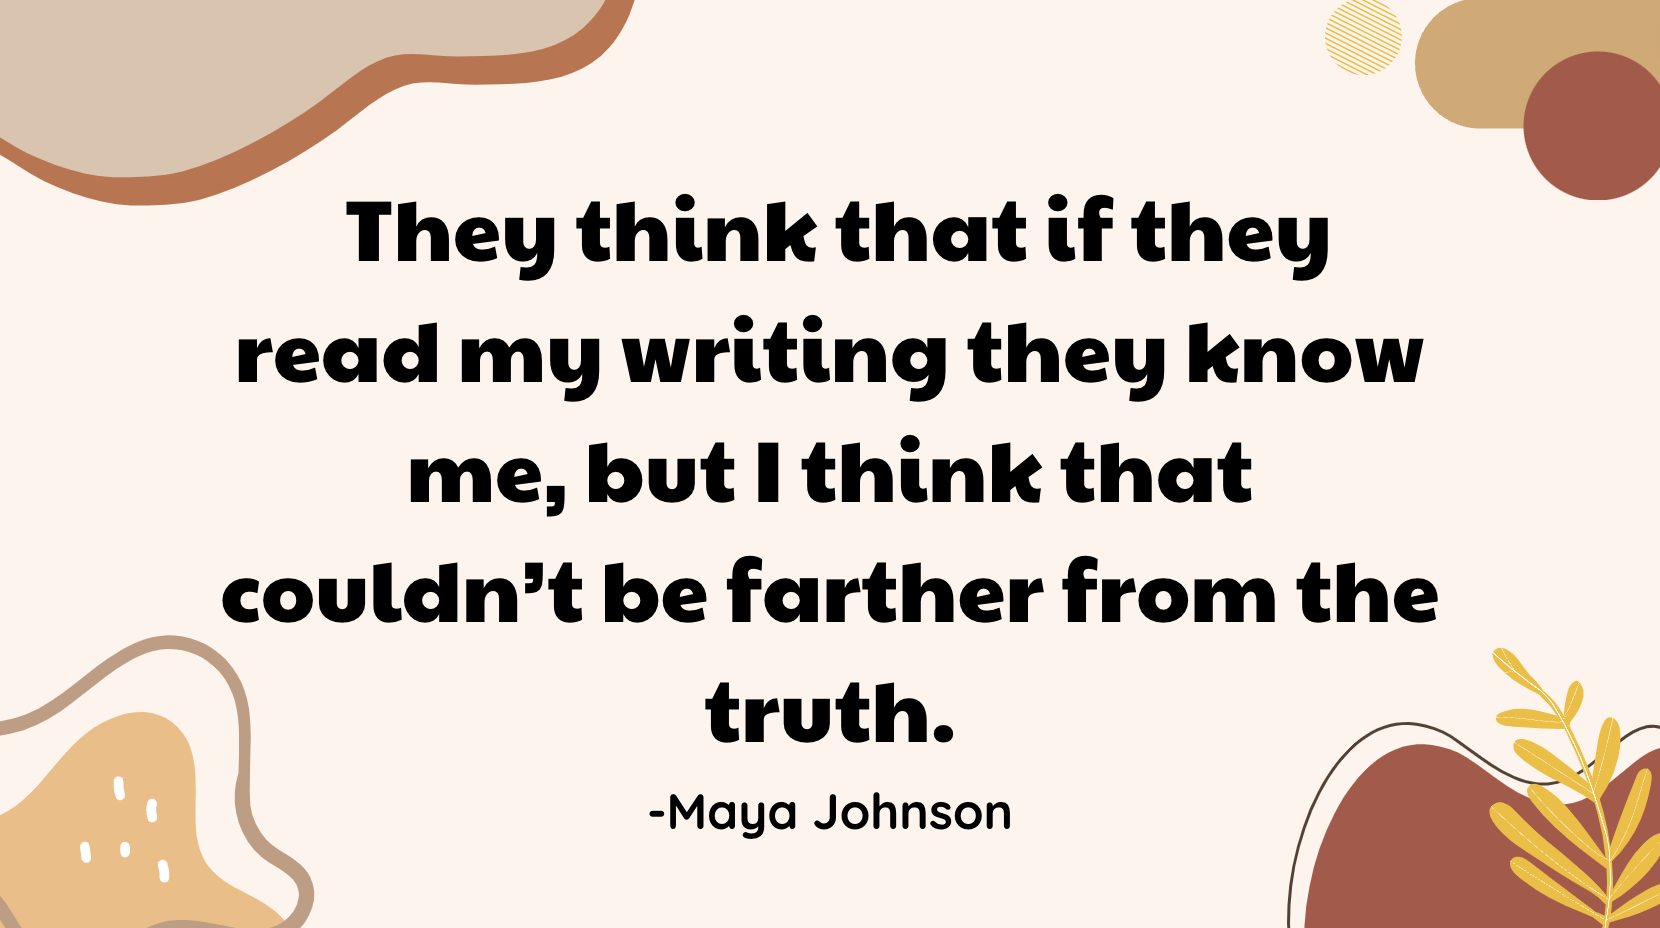  They think that if they read my writing they know me, but I think that couldn’t be farther from the truth. -Maya Johnson